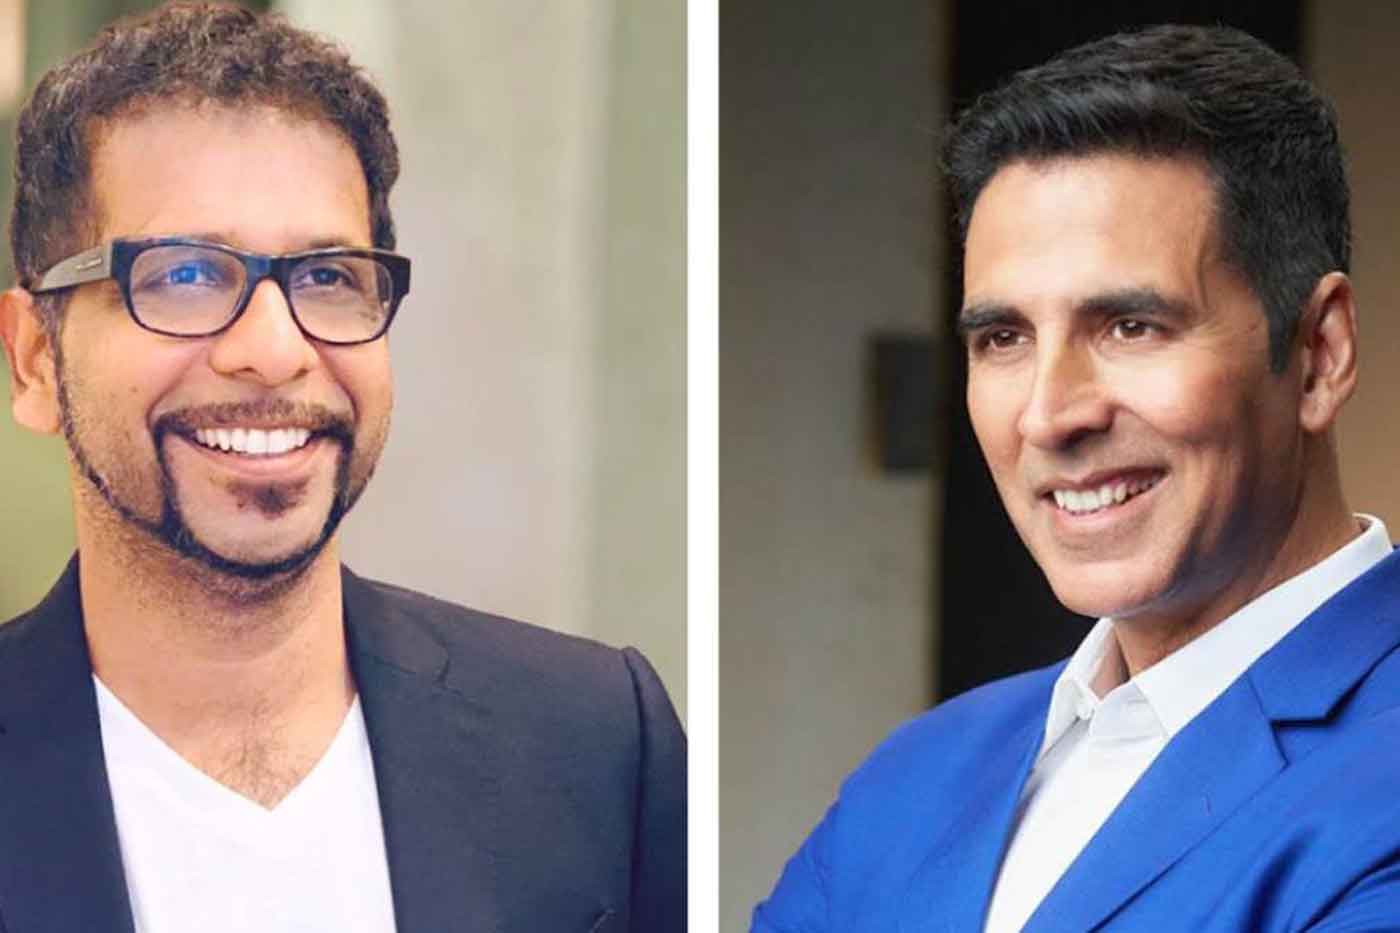 Akshay Kumar and Good Glamm join hands to launch personal care and wellness products for men